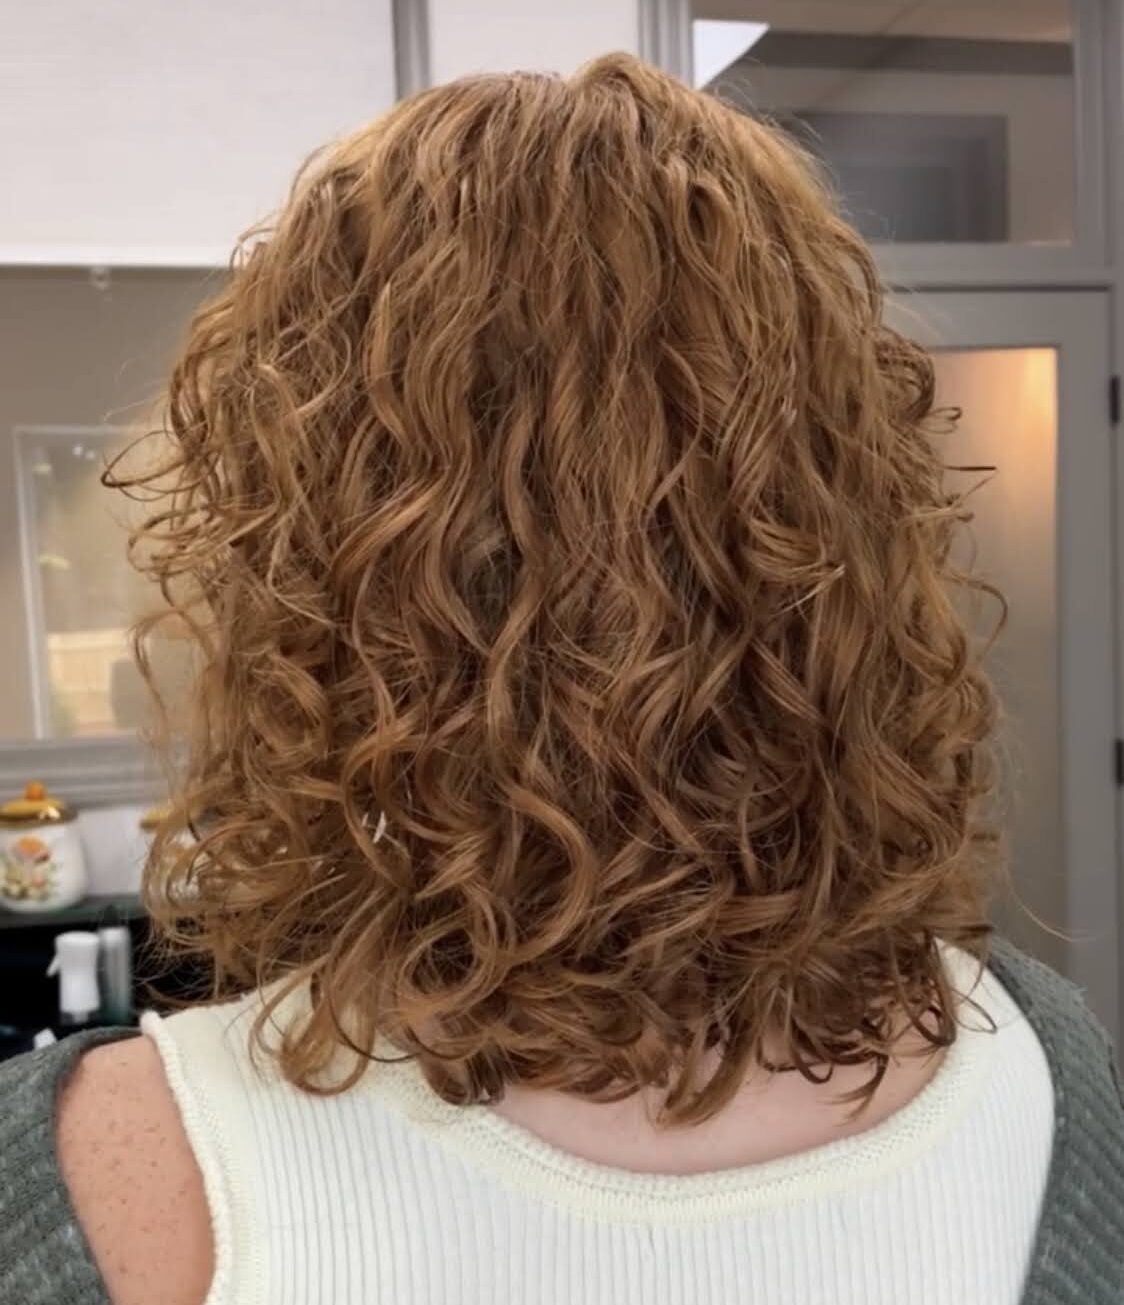 Curly Hair Style and Curly Cut in Woodstock